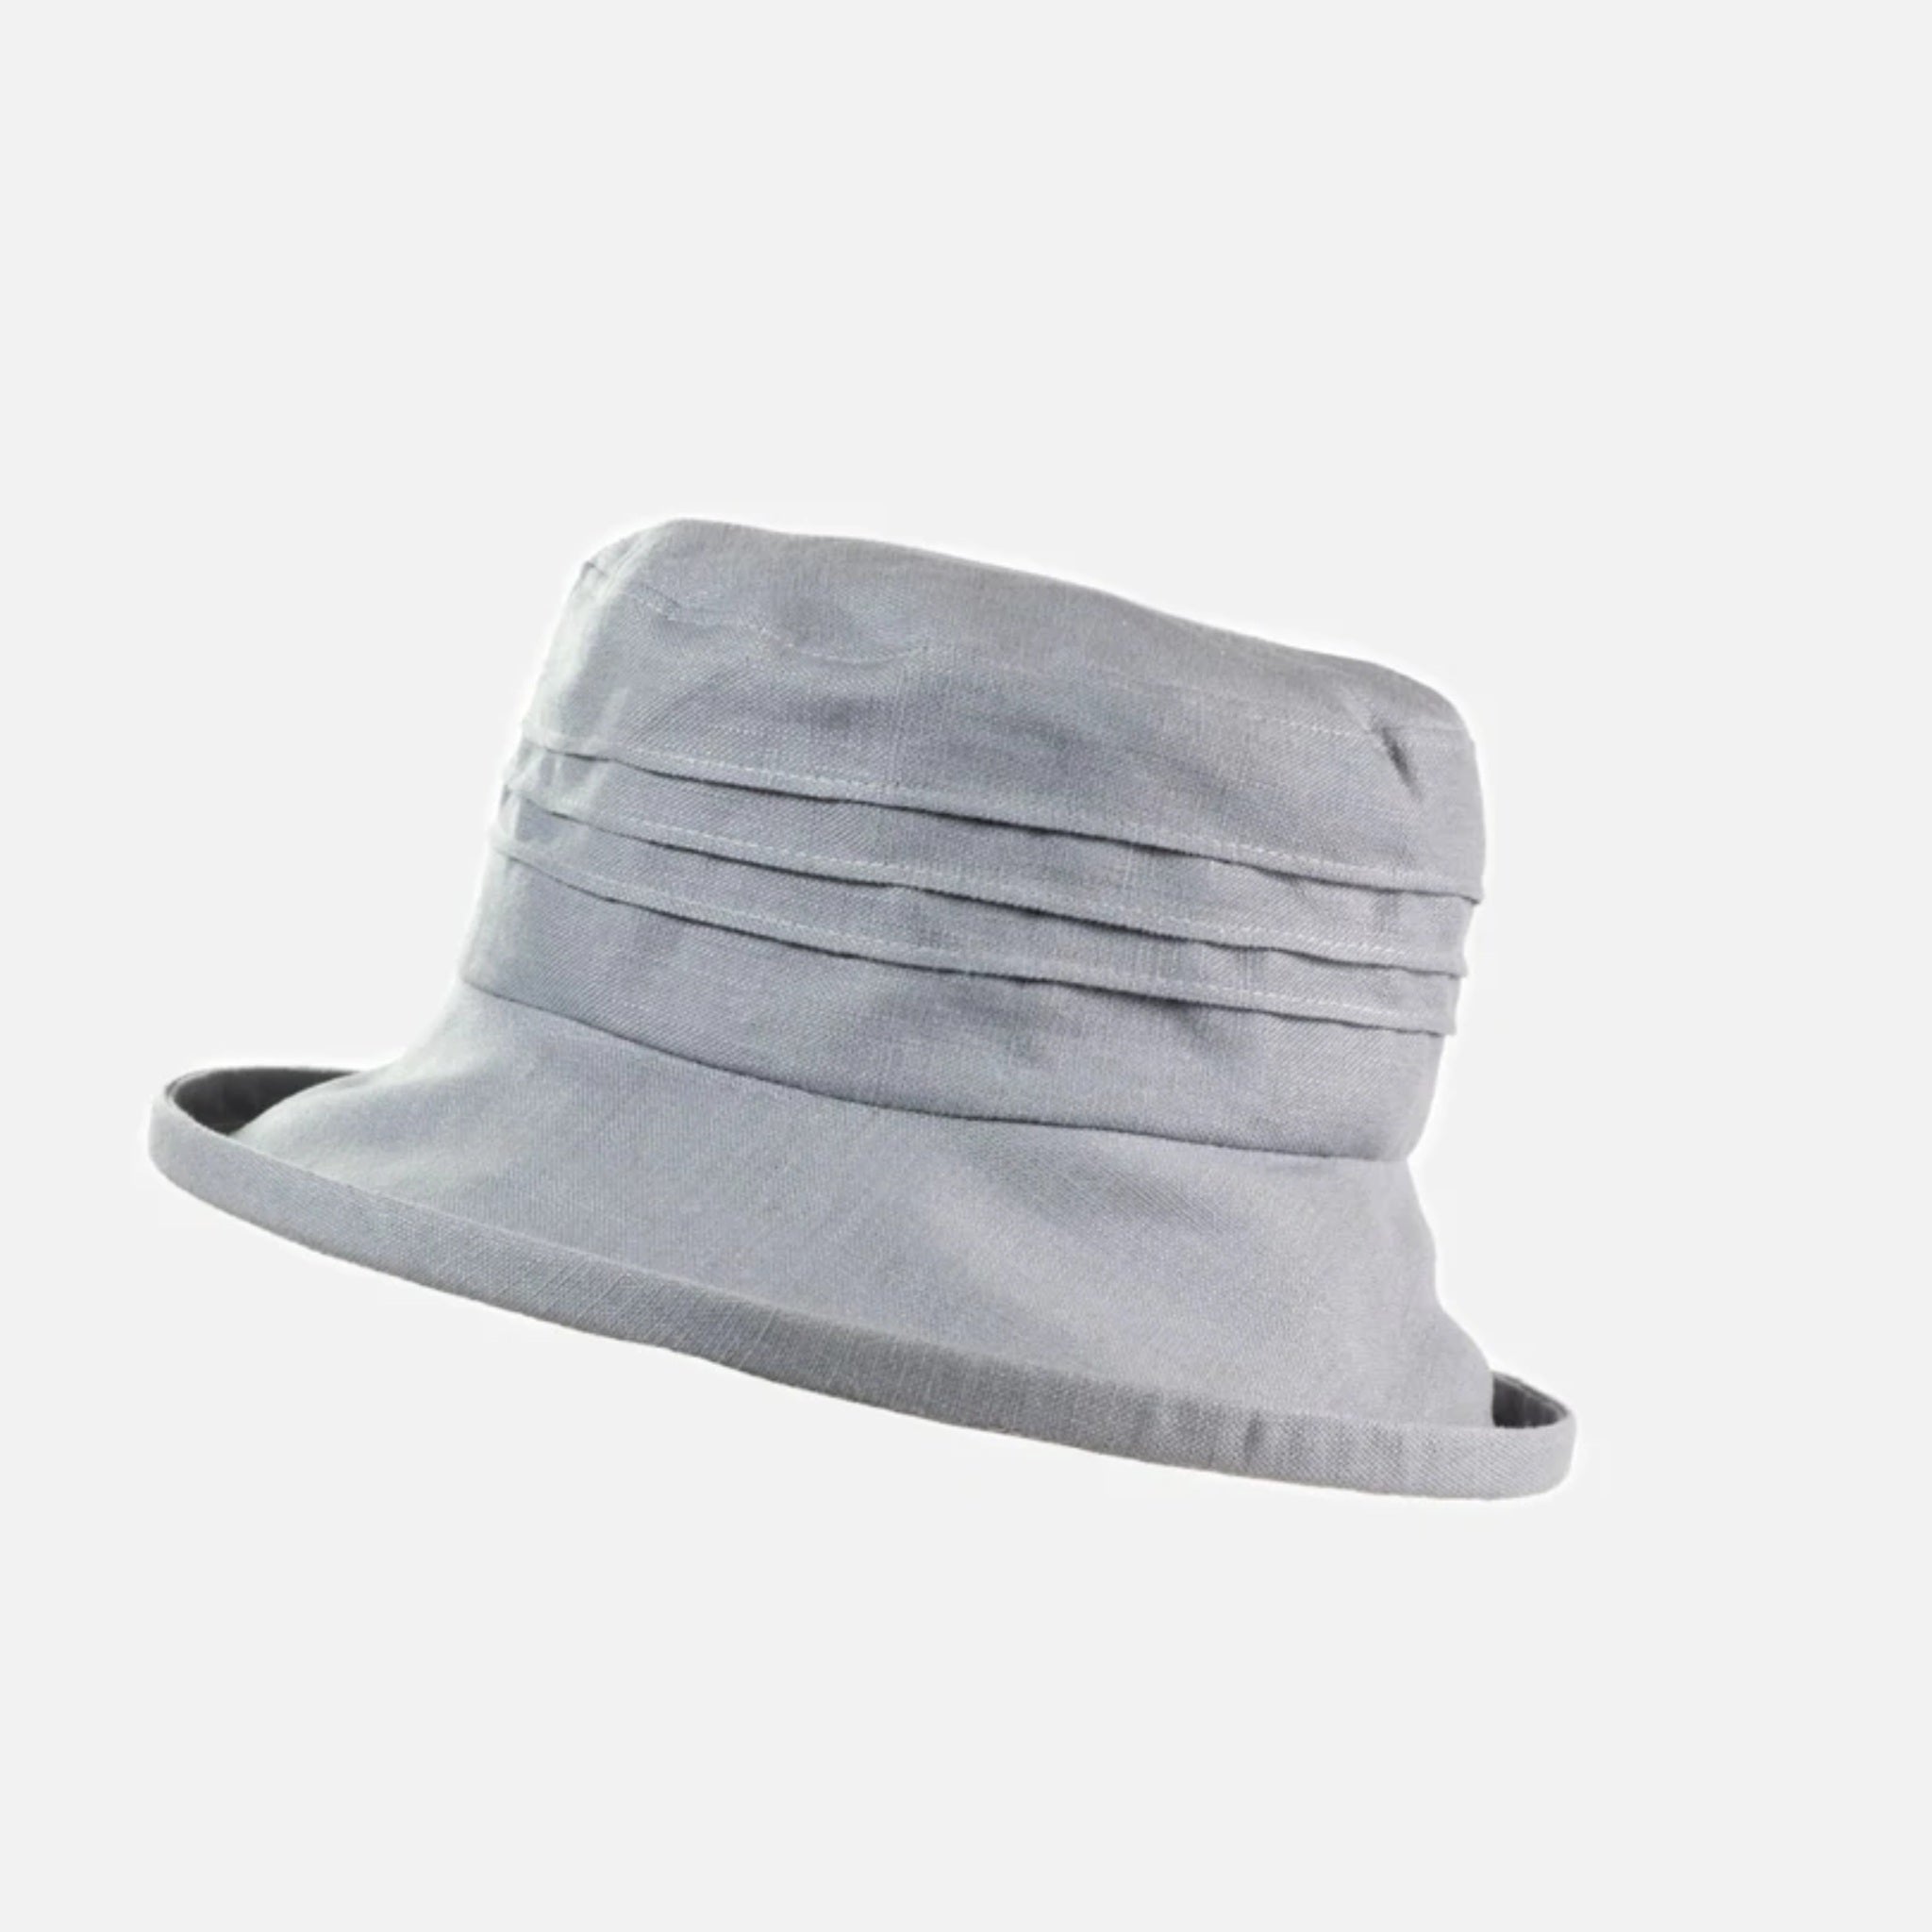 The Hat Shop Proppa Toppa Small Brim Packable Linen Sun Hat Light Grey